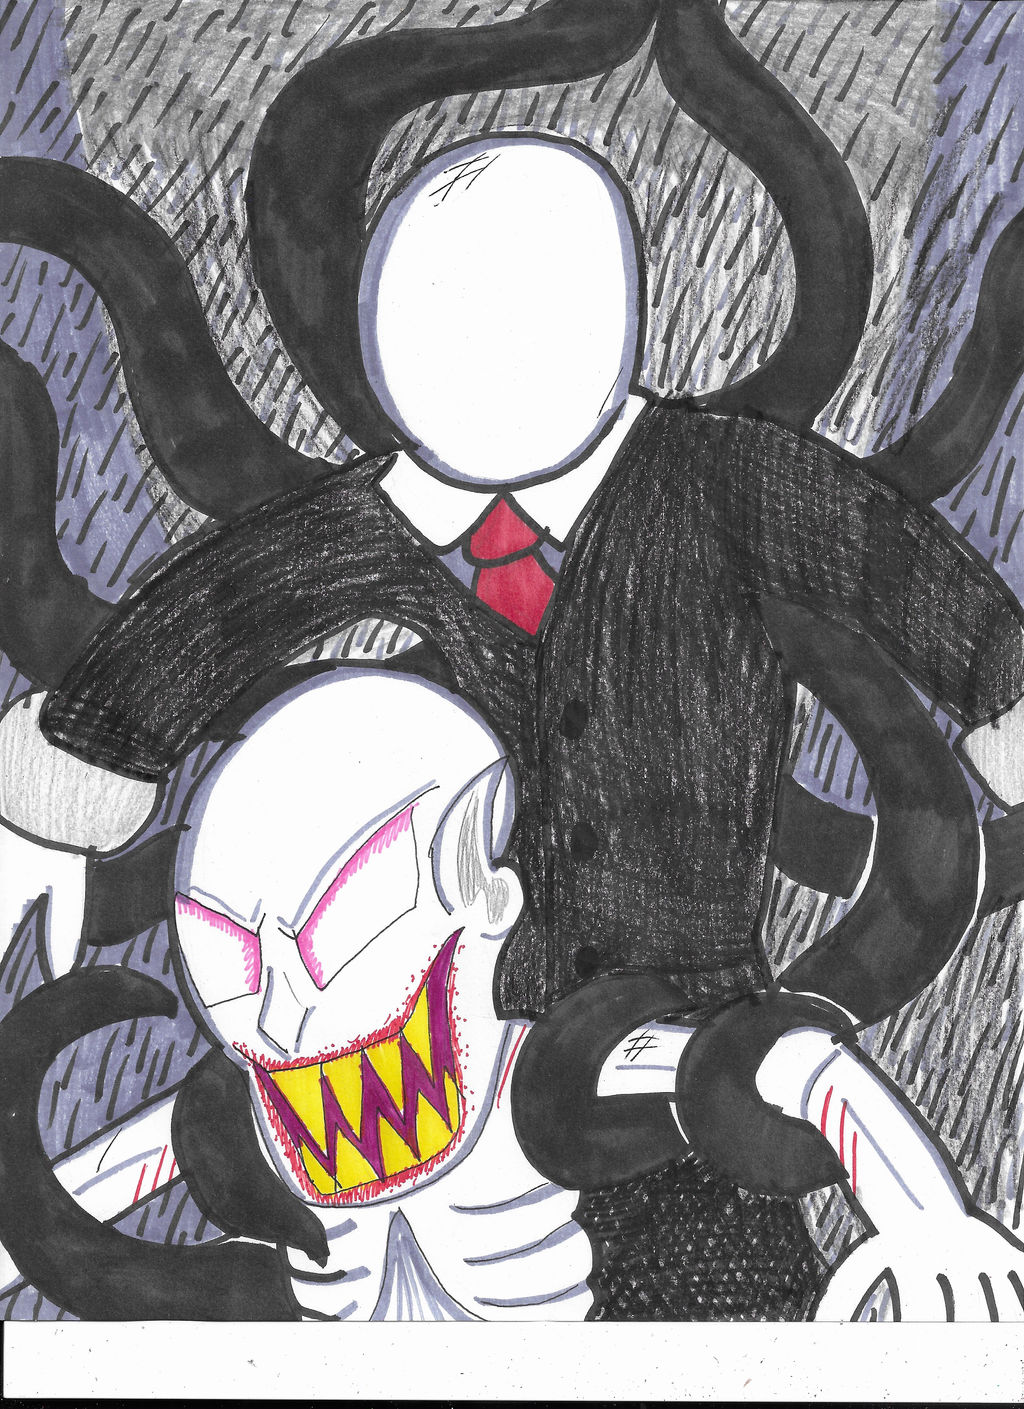 The Villains by SCP-096-2 on DeviantArt